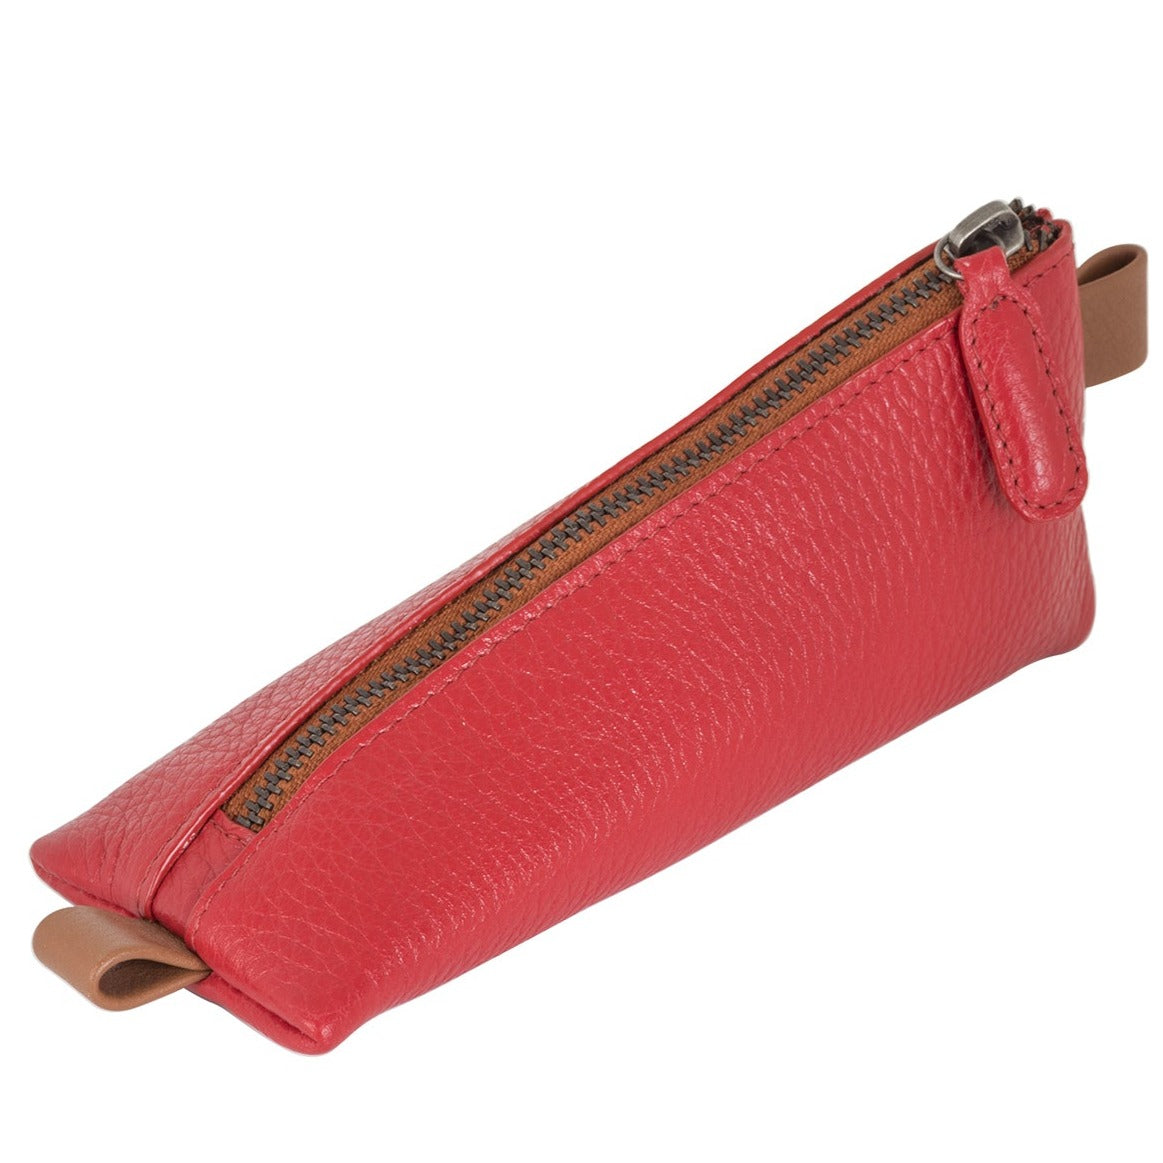 Chic pencil case - Scarlet Red/ Brown